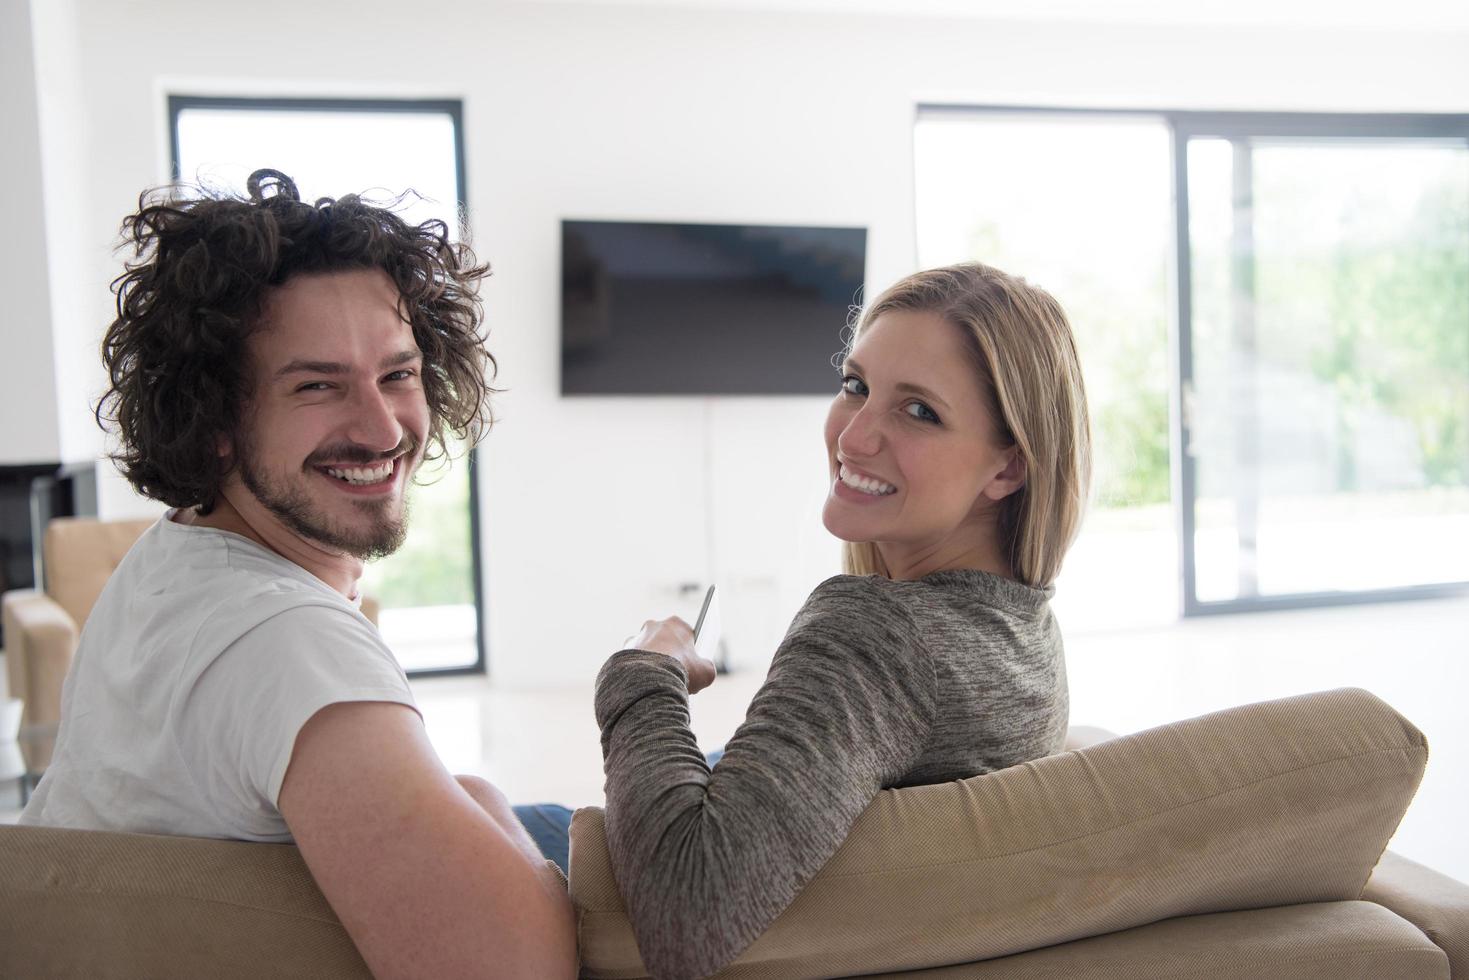 Rear view of couple watching television photo